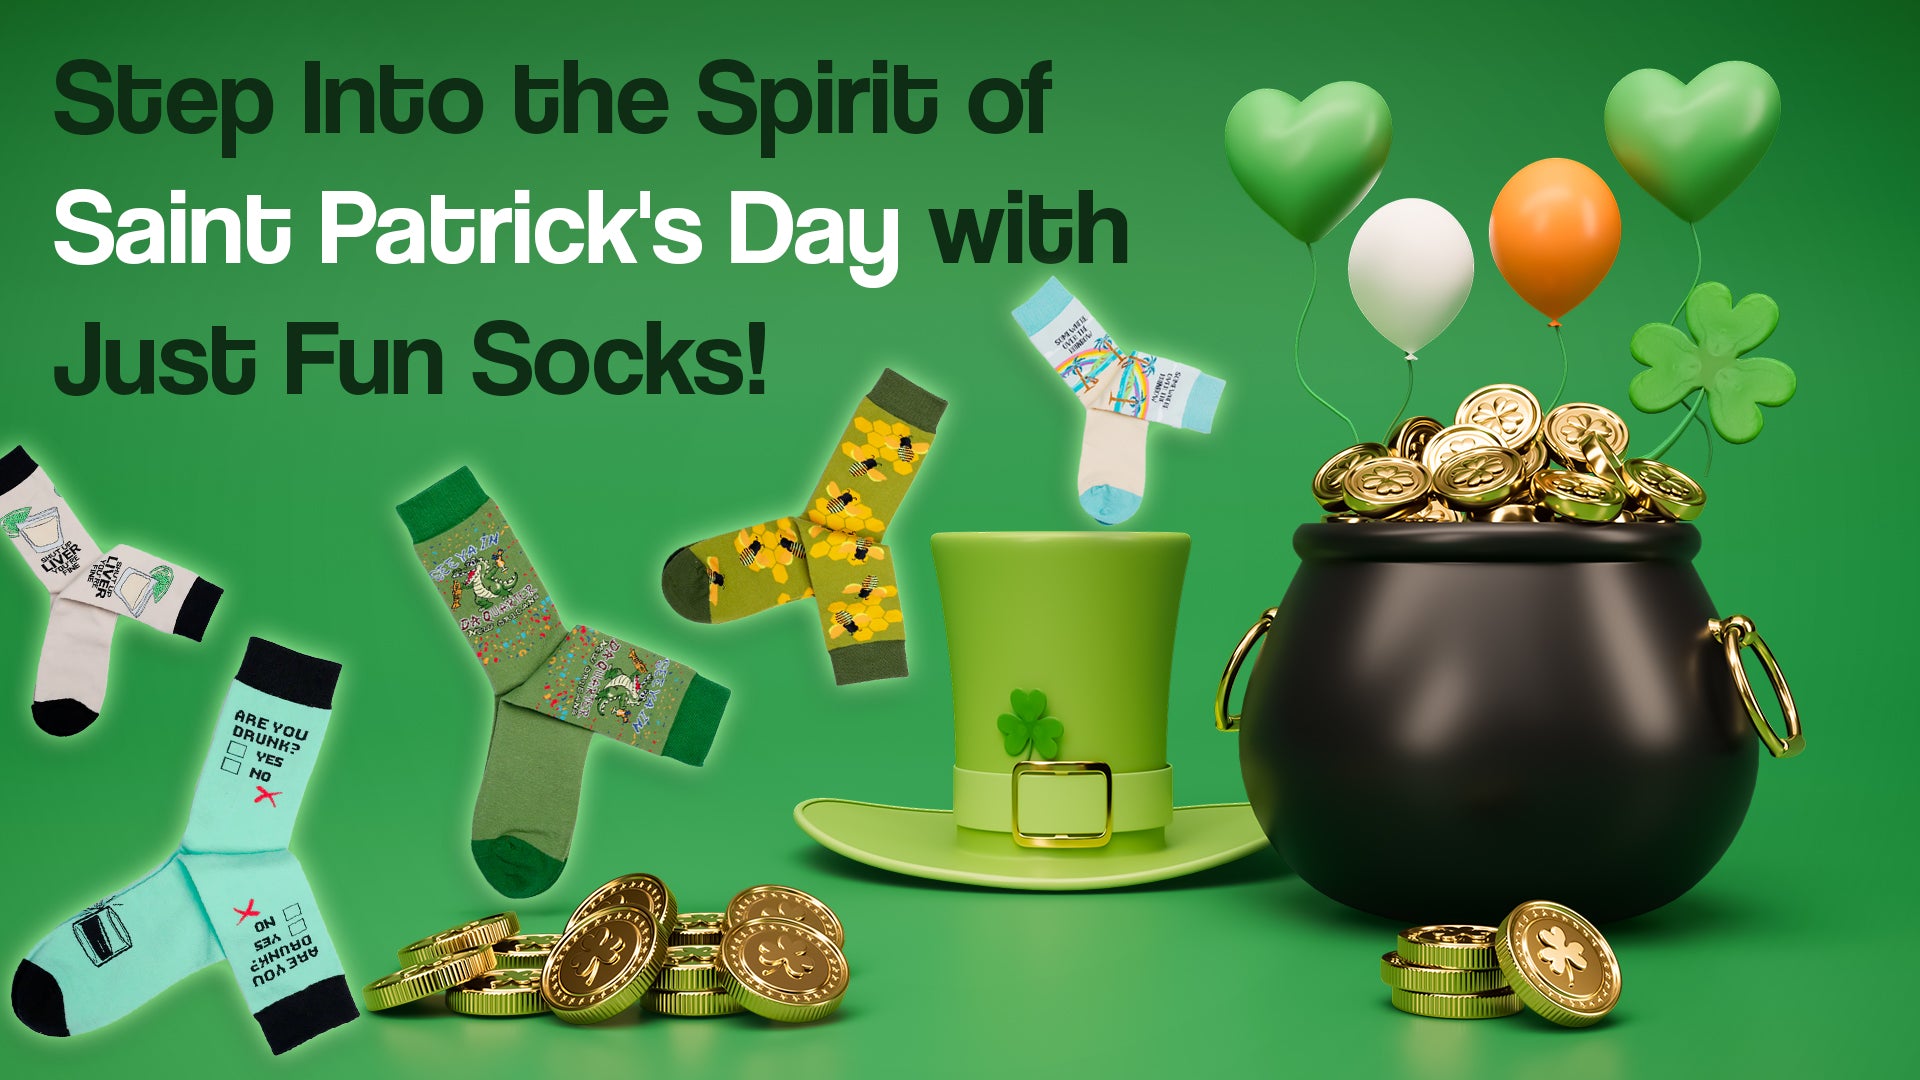 Step Into the Spirit of Saint Patrick's Day with Just Fun Socks!